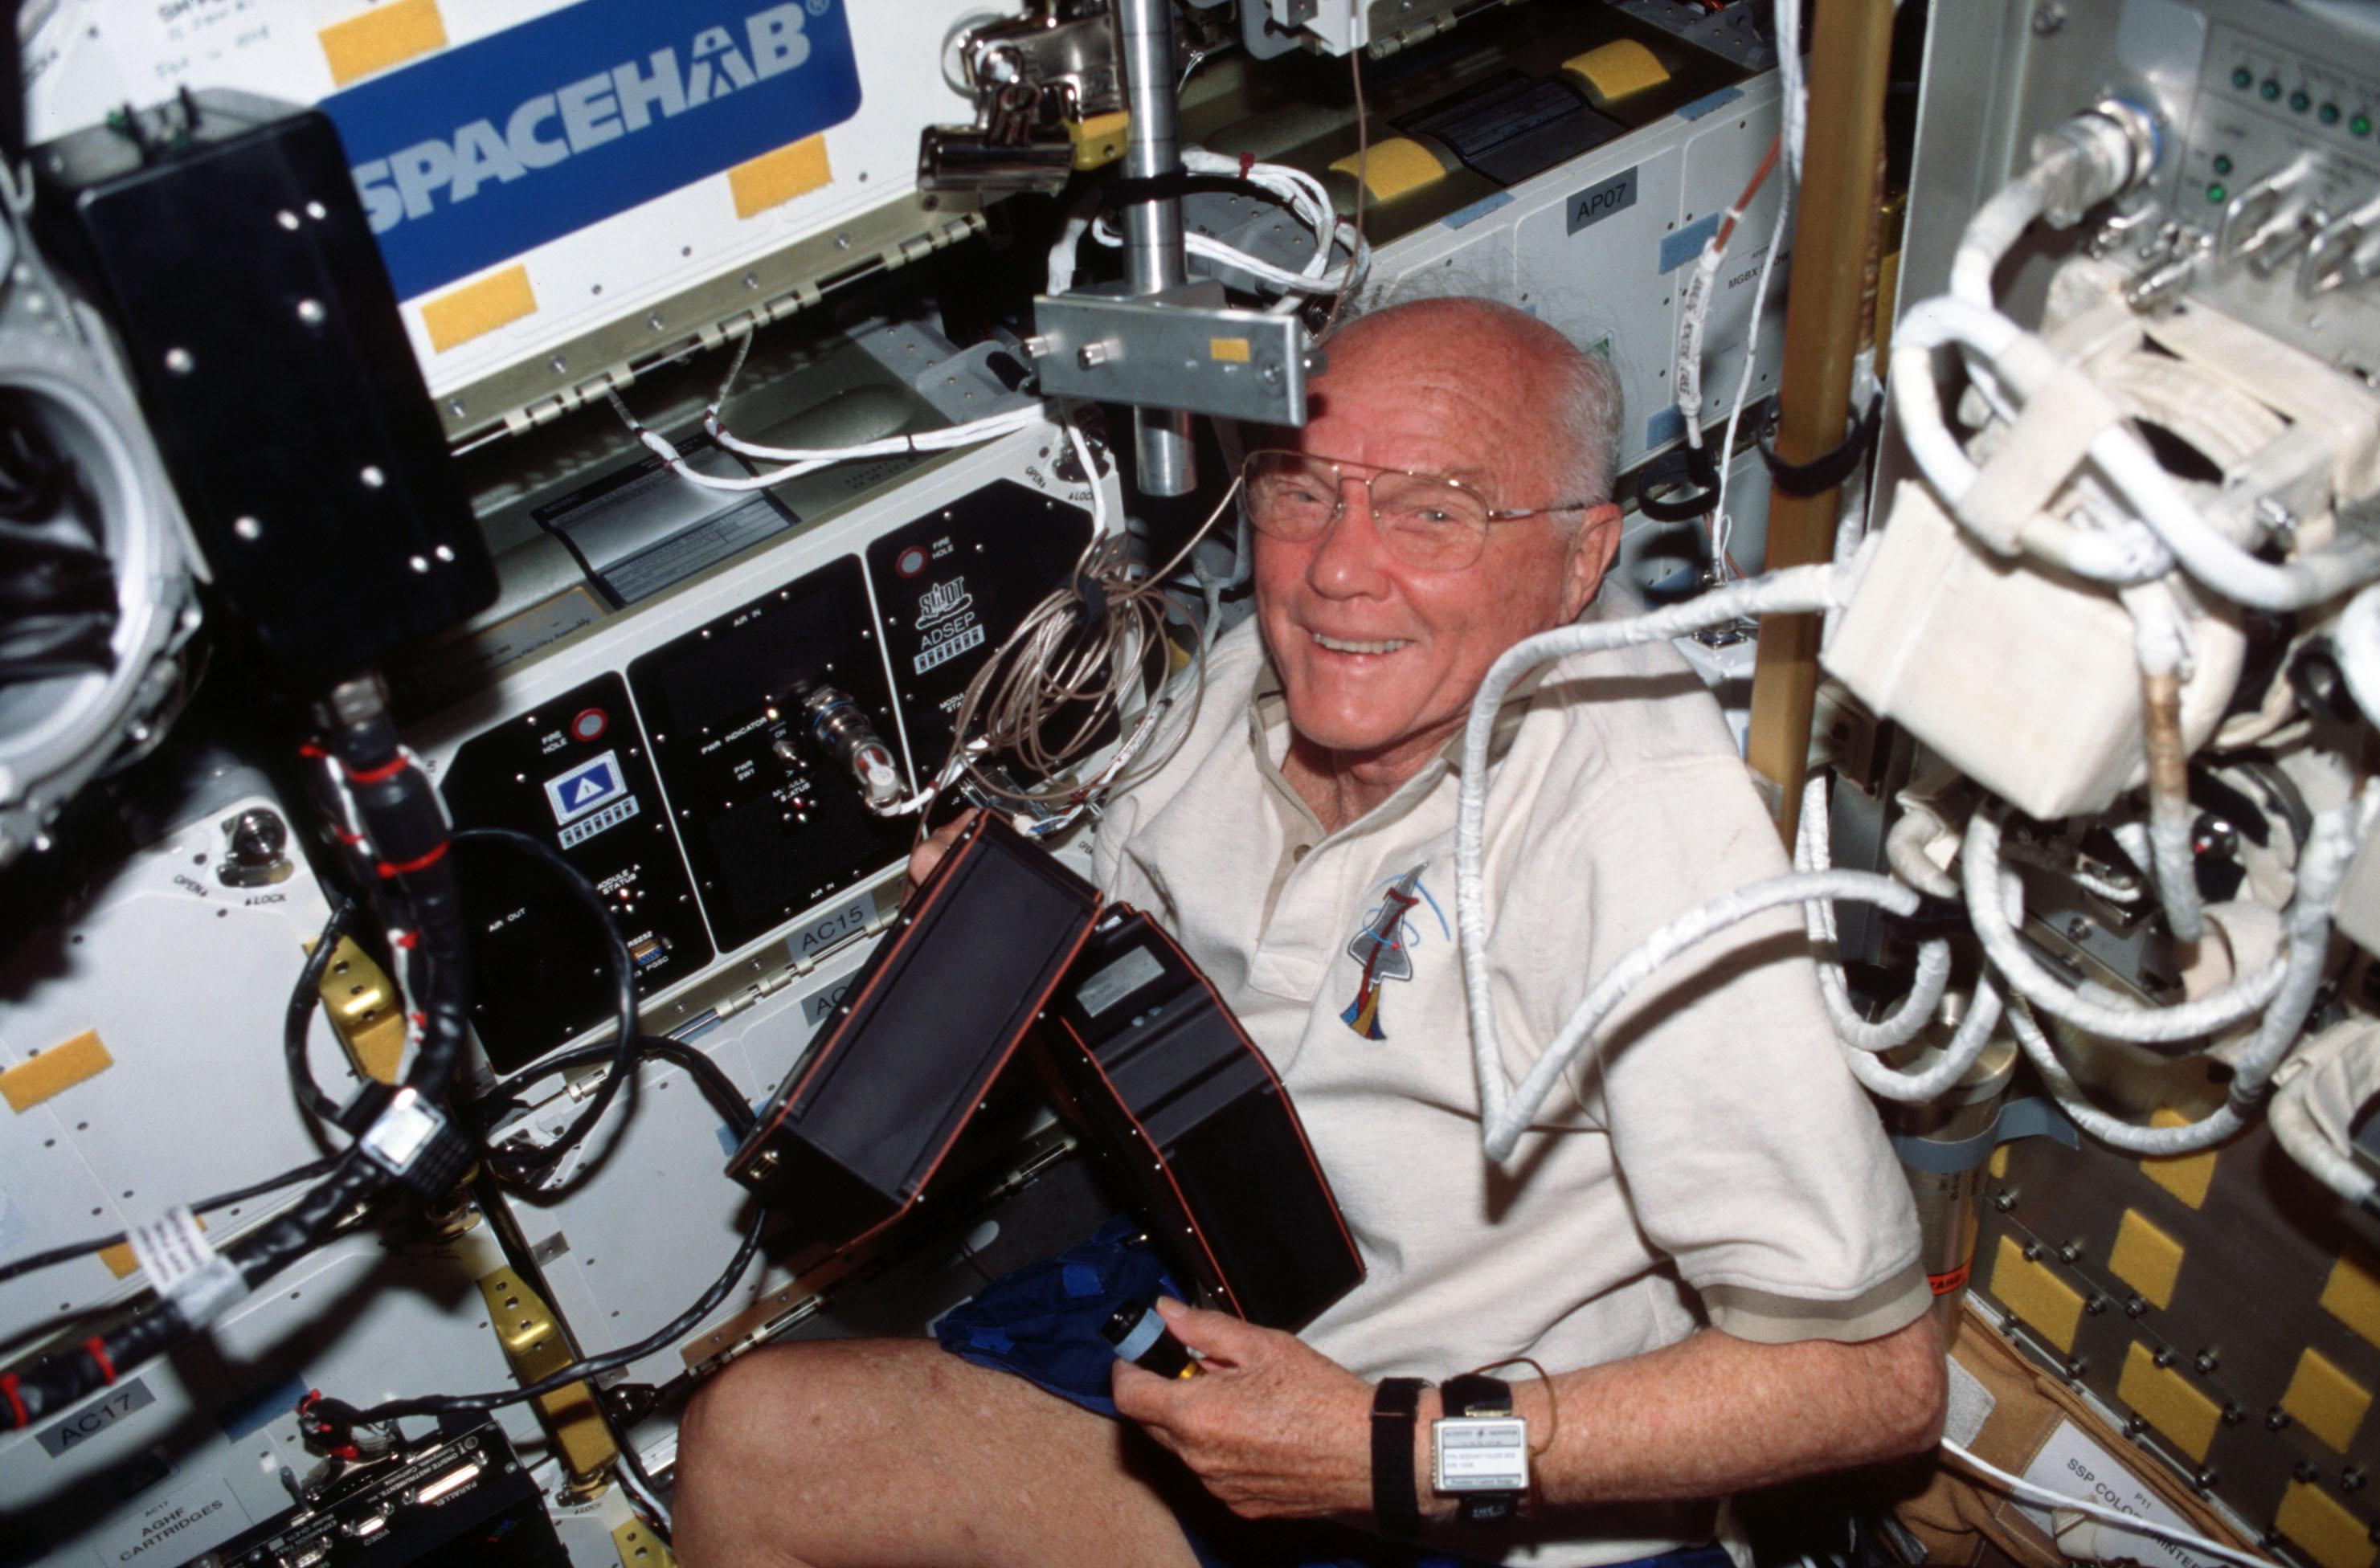 Former astronaut John Glenn aboard the space shuttle Discovery in 1998. This flight has made him the oldest man to be in orbit.jpg